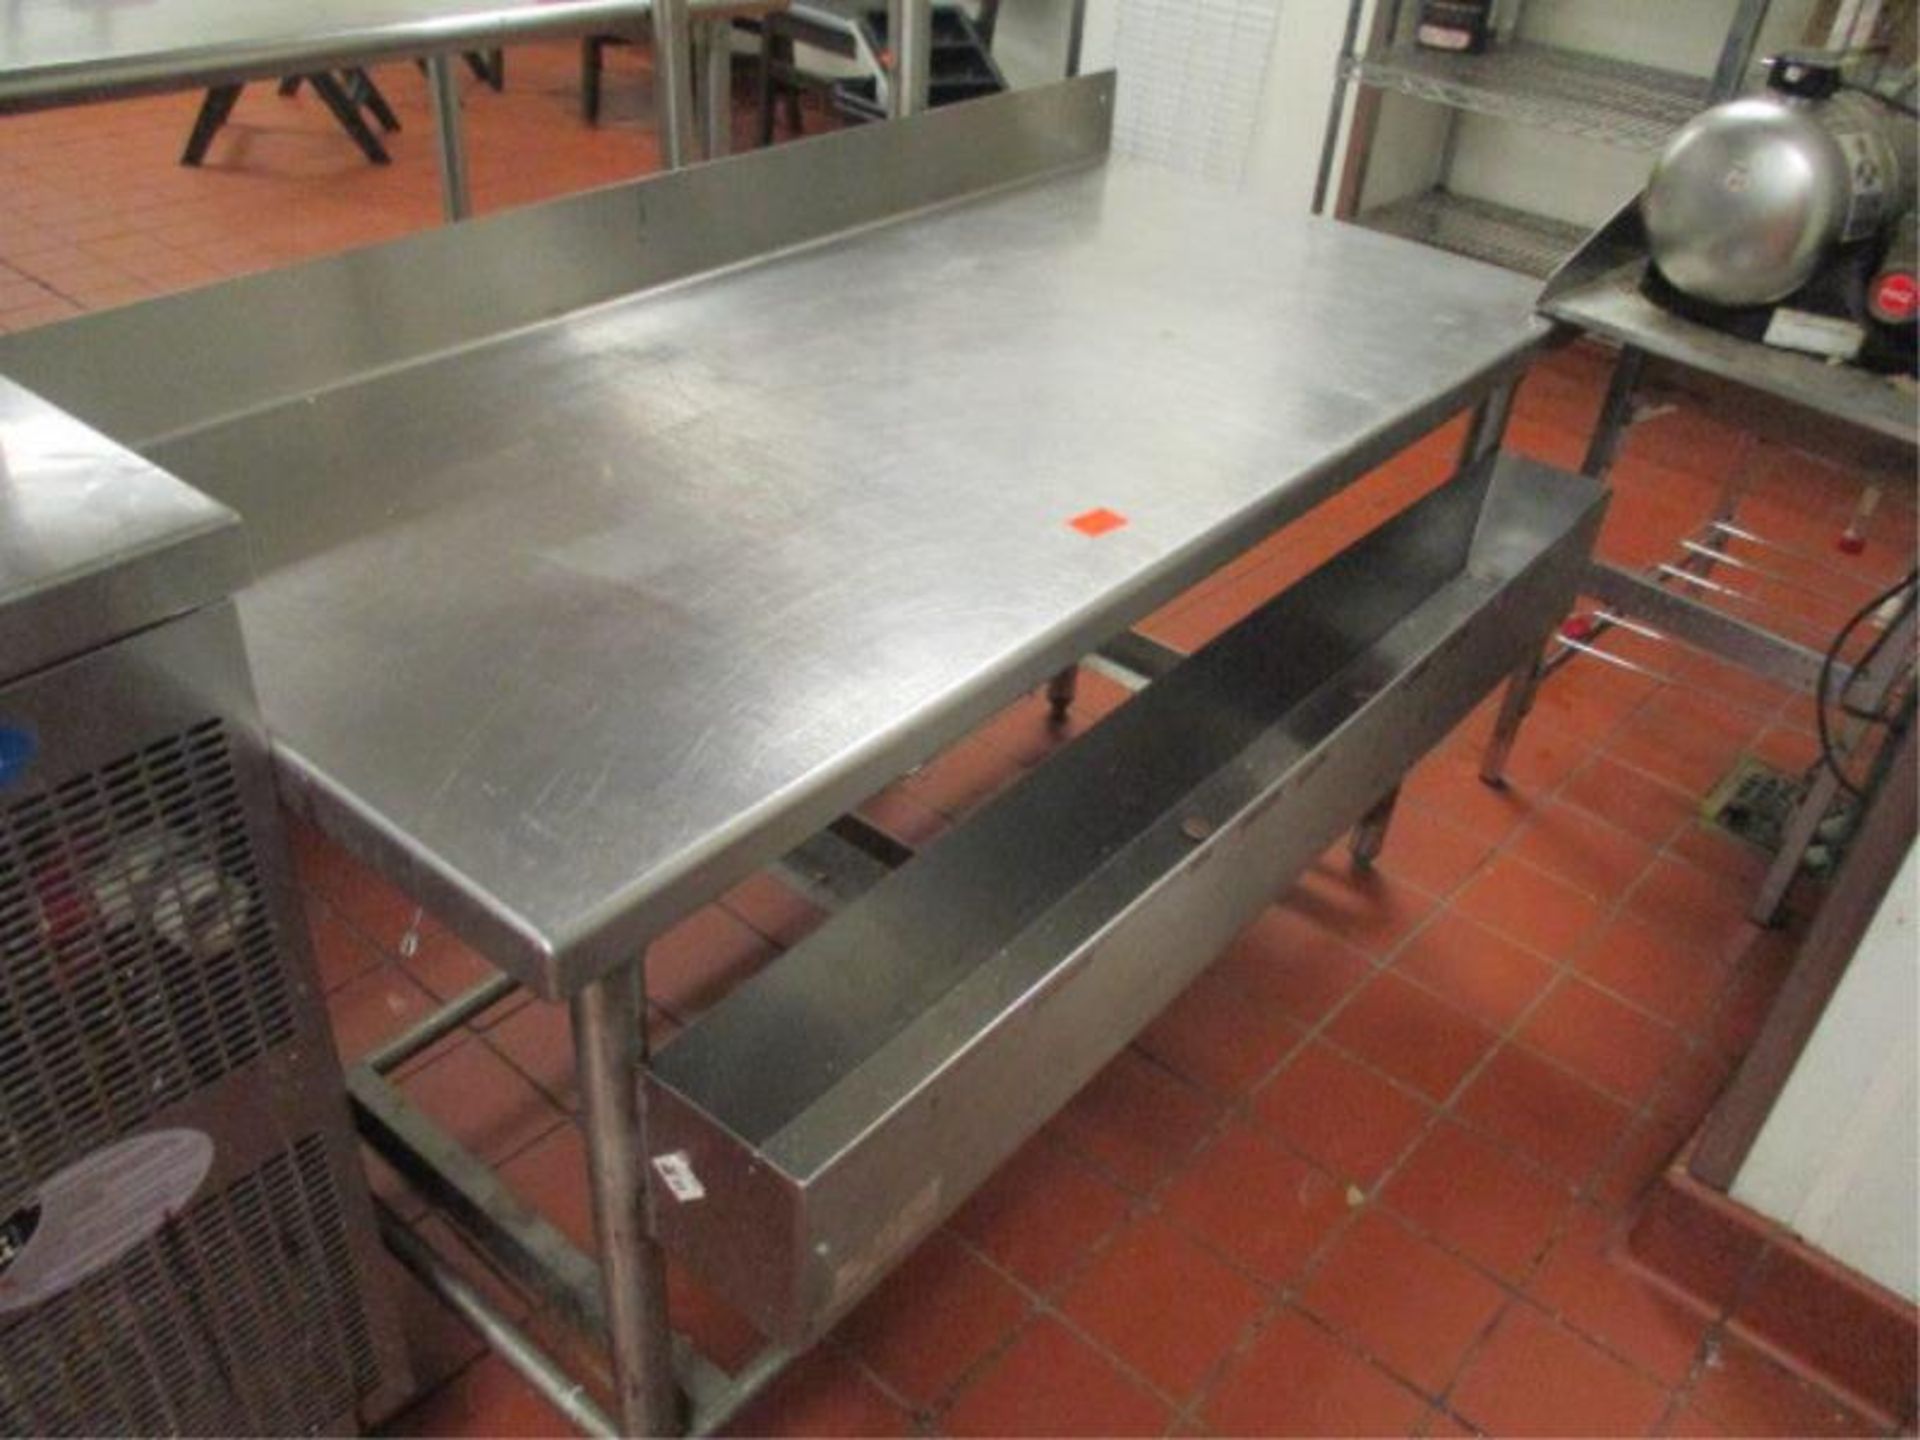 Prep Table, Stainless Steel, Short w / Speed Rail, 4.5' - Image 2 of 2